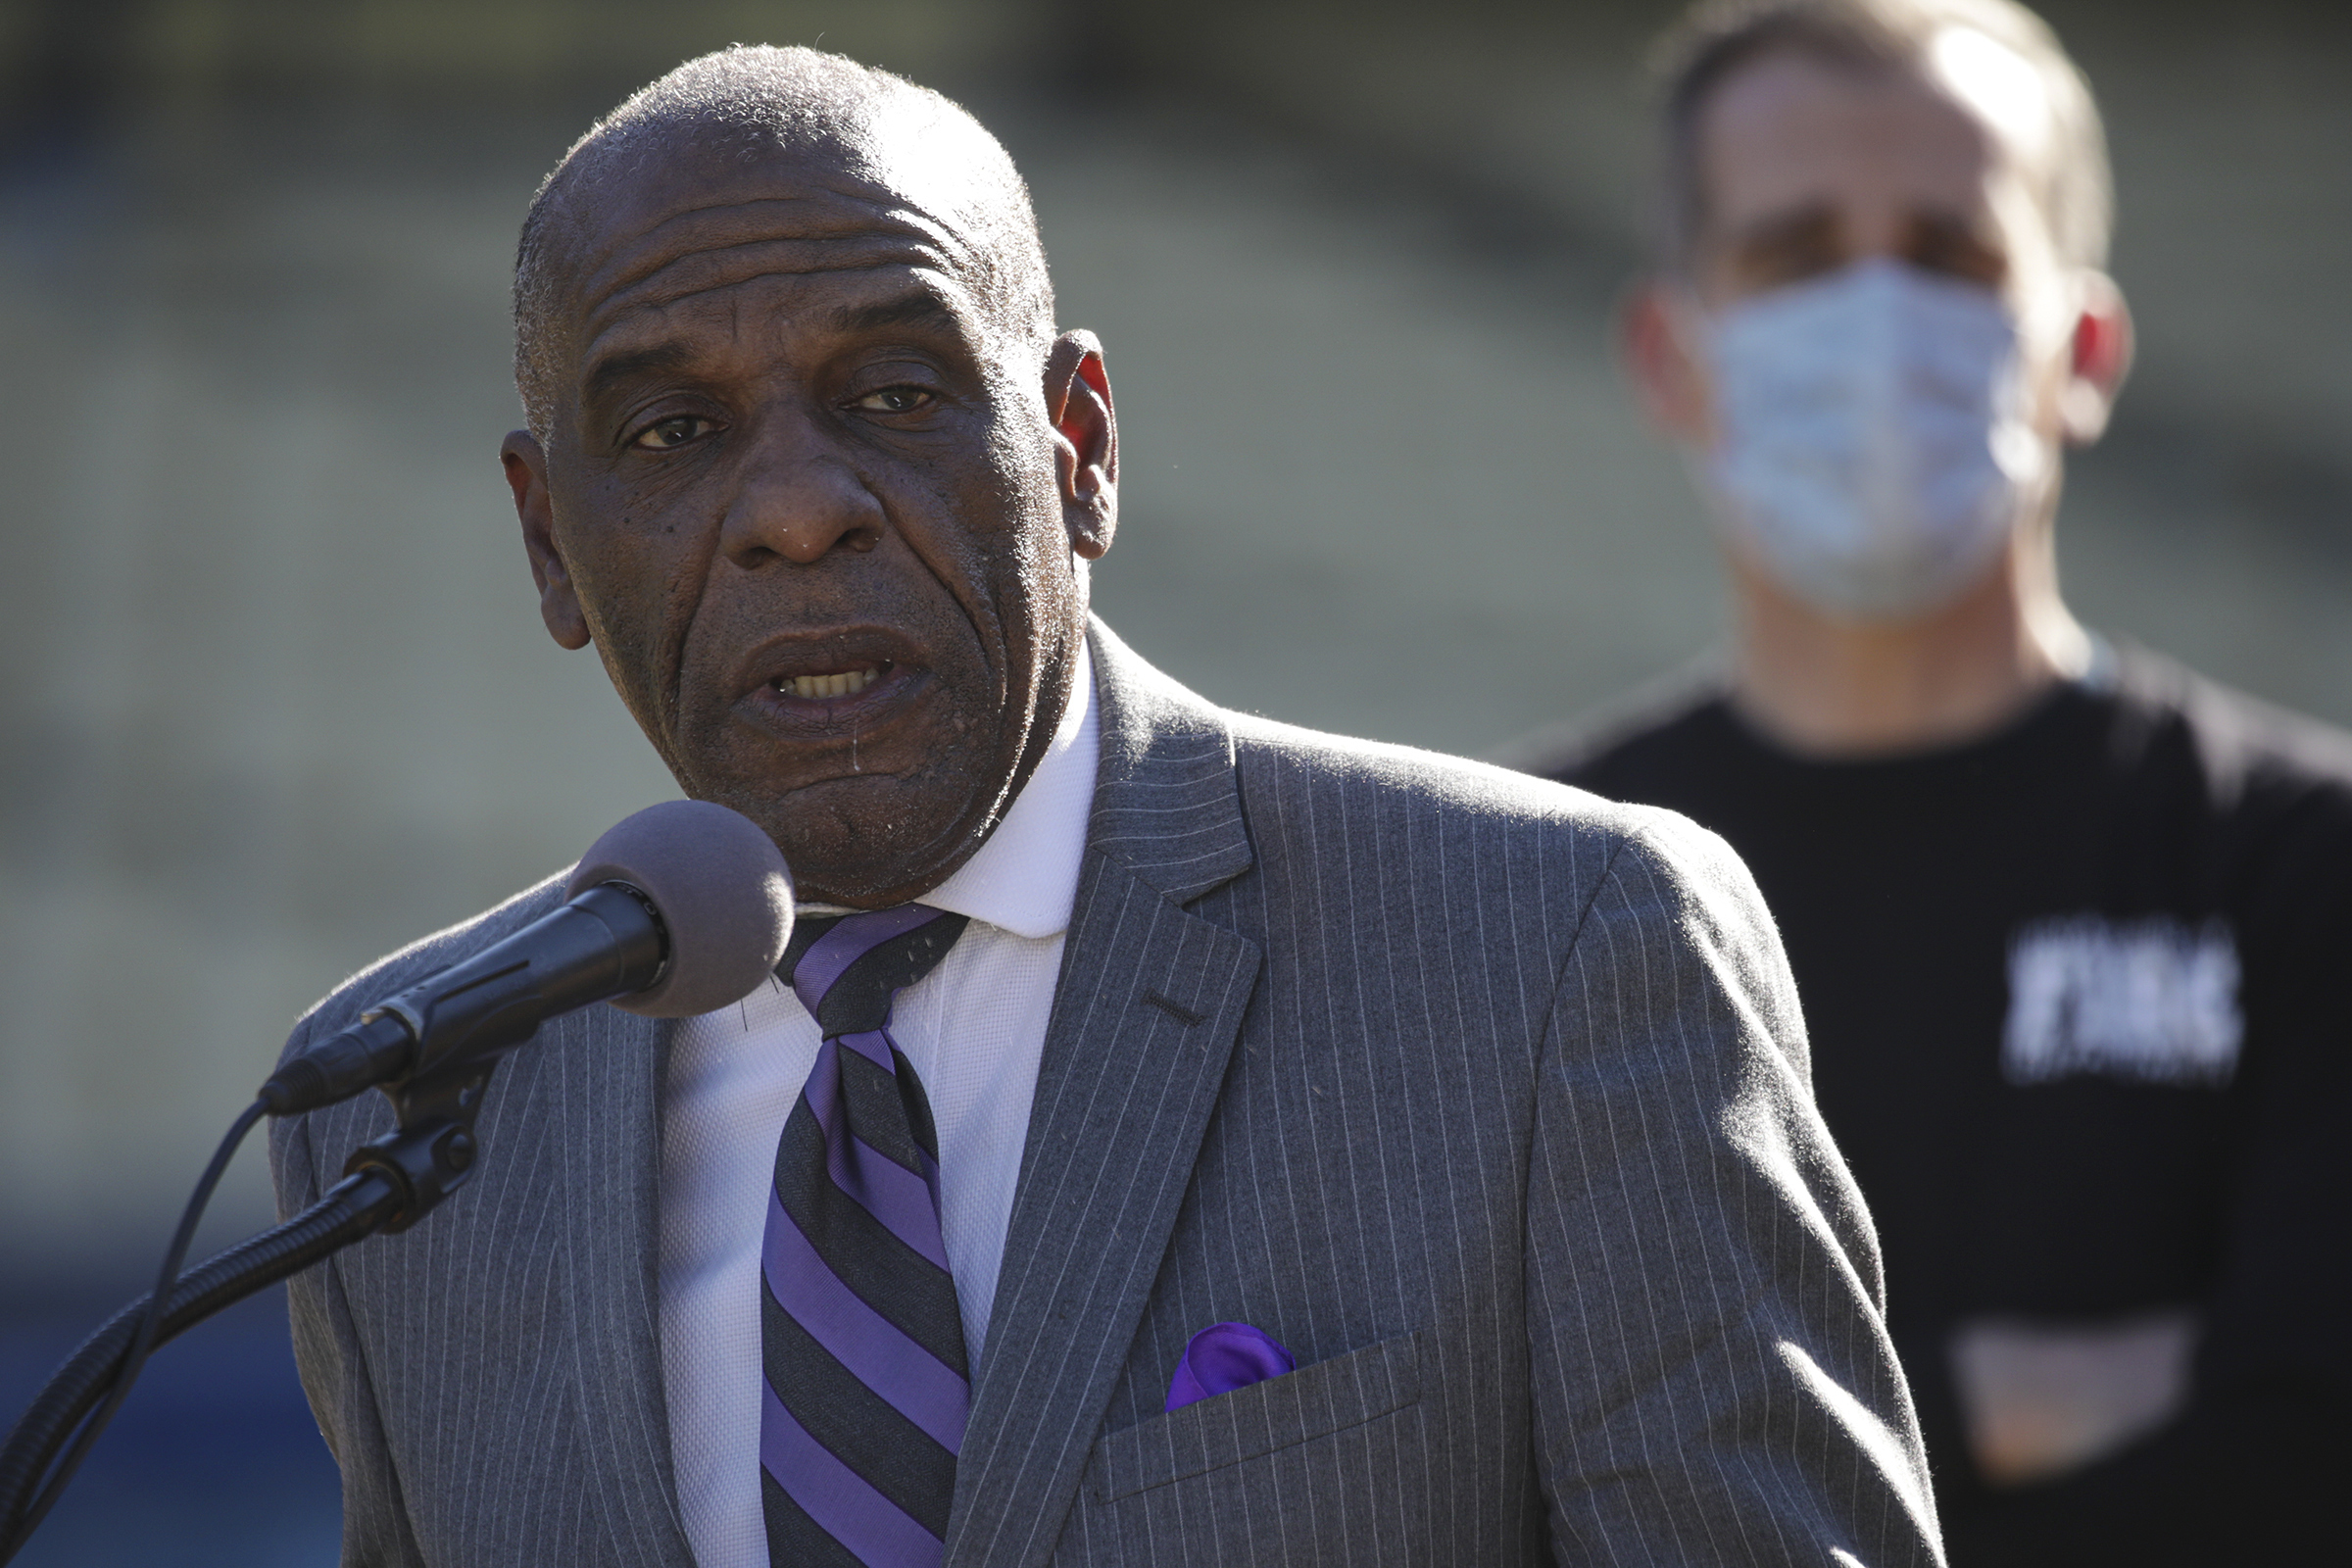 An older man in a suit speaks at a microphone; another man wearing a mask stands out of focus in the background.